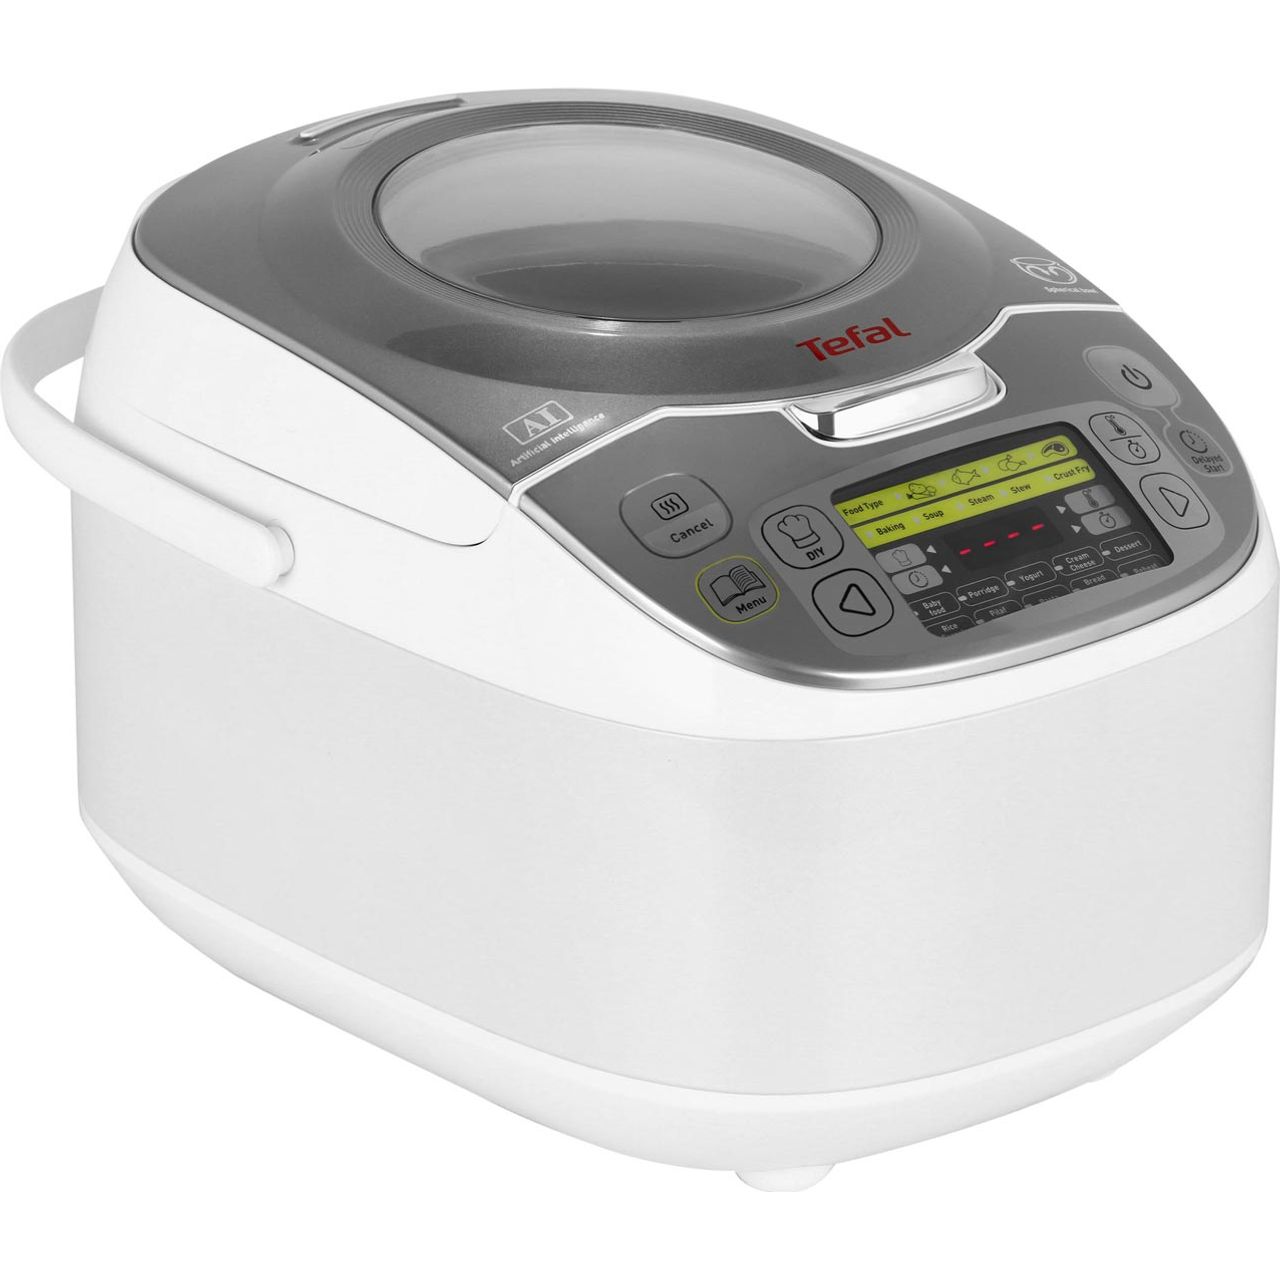 Tefal MultiCook Advanced 45 in 1 RK812142 5 Litre Multi Cooker Review